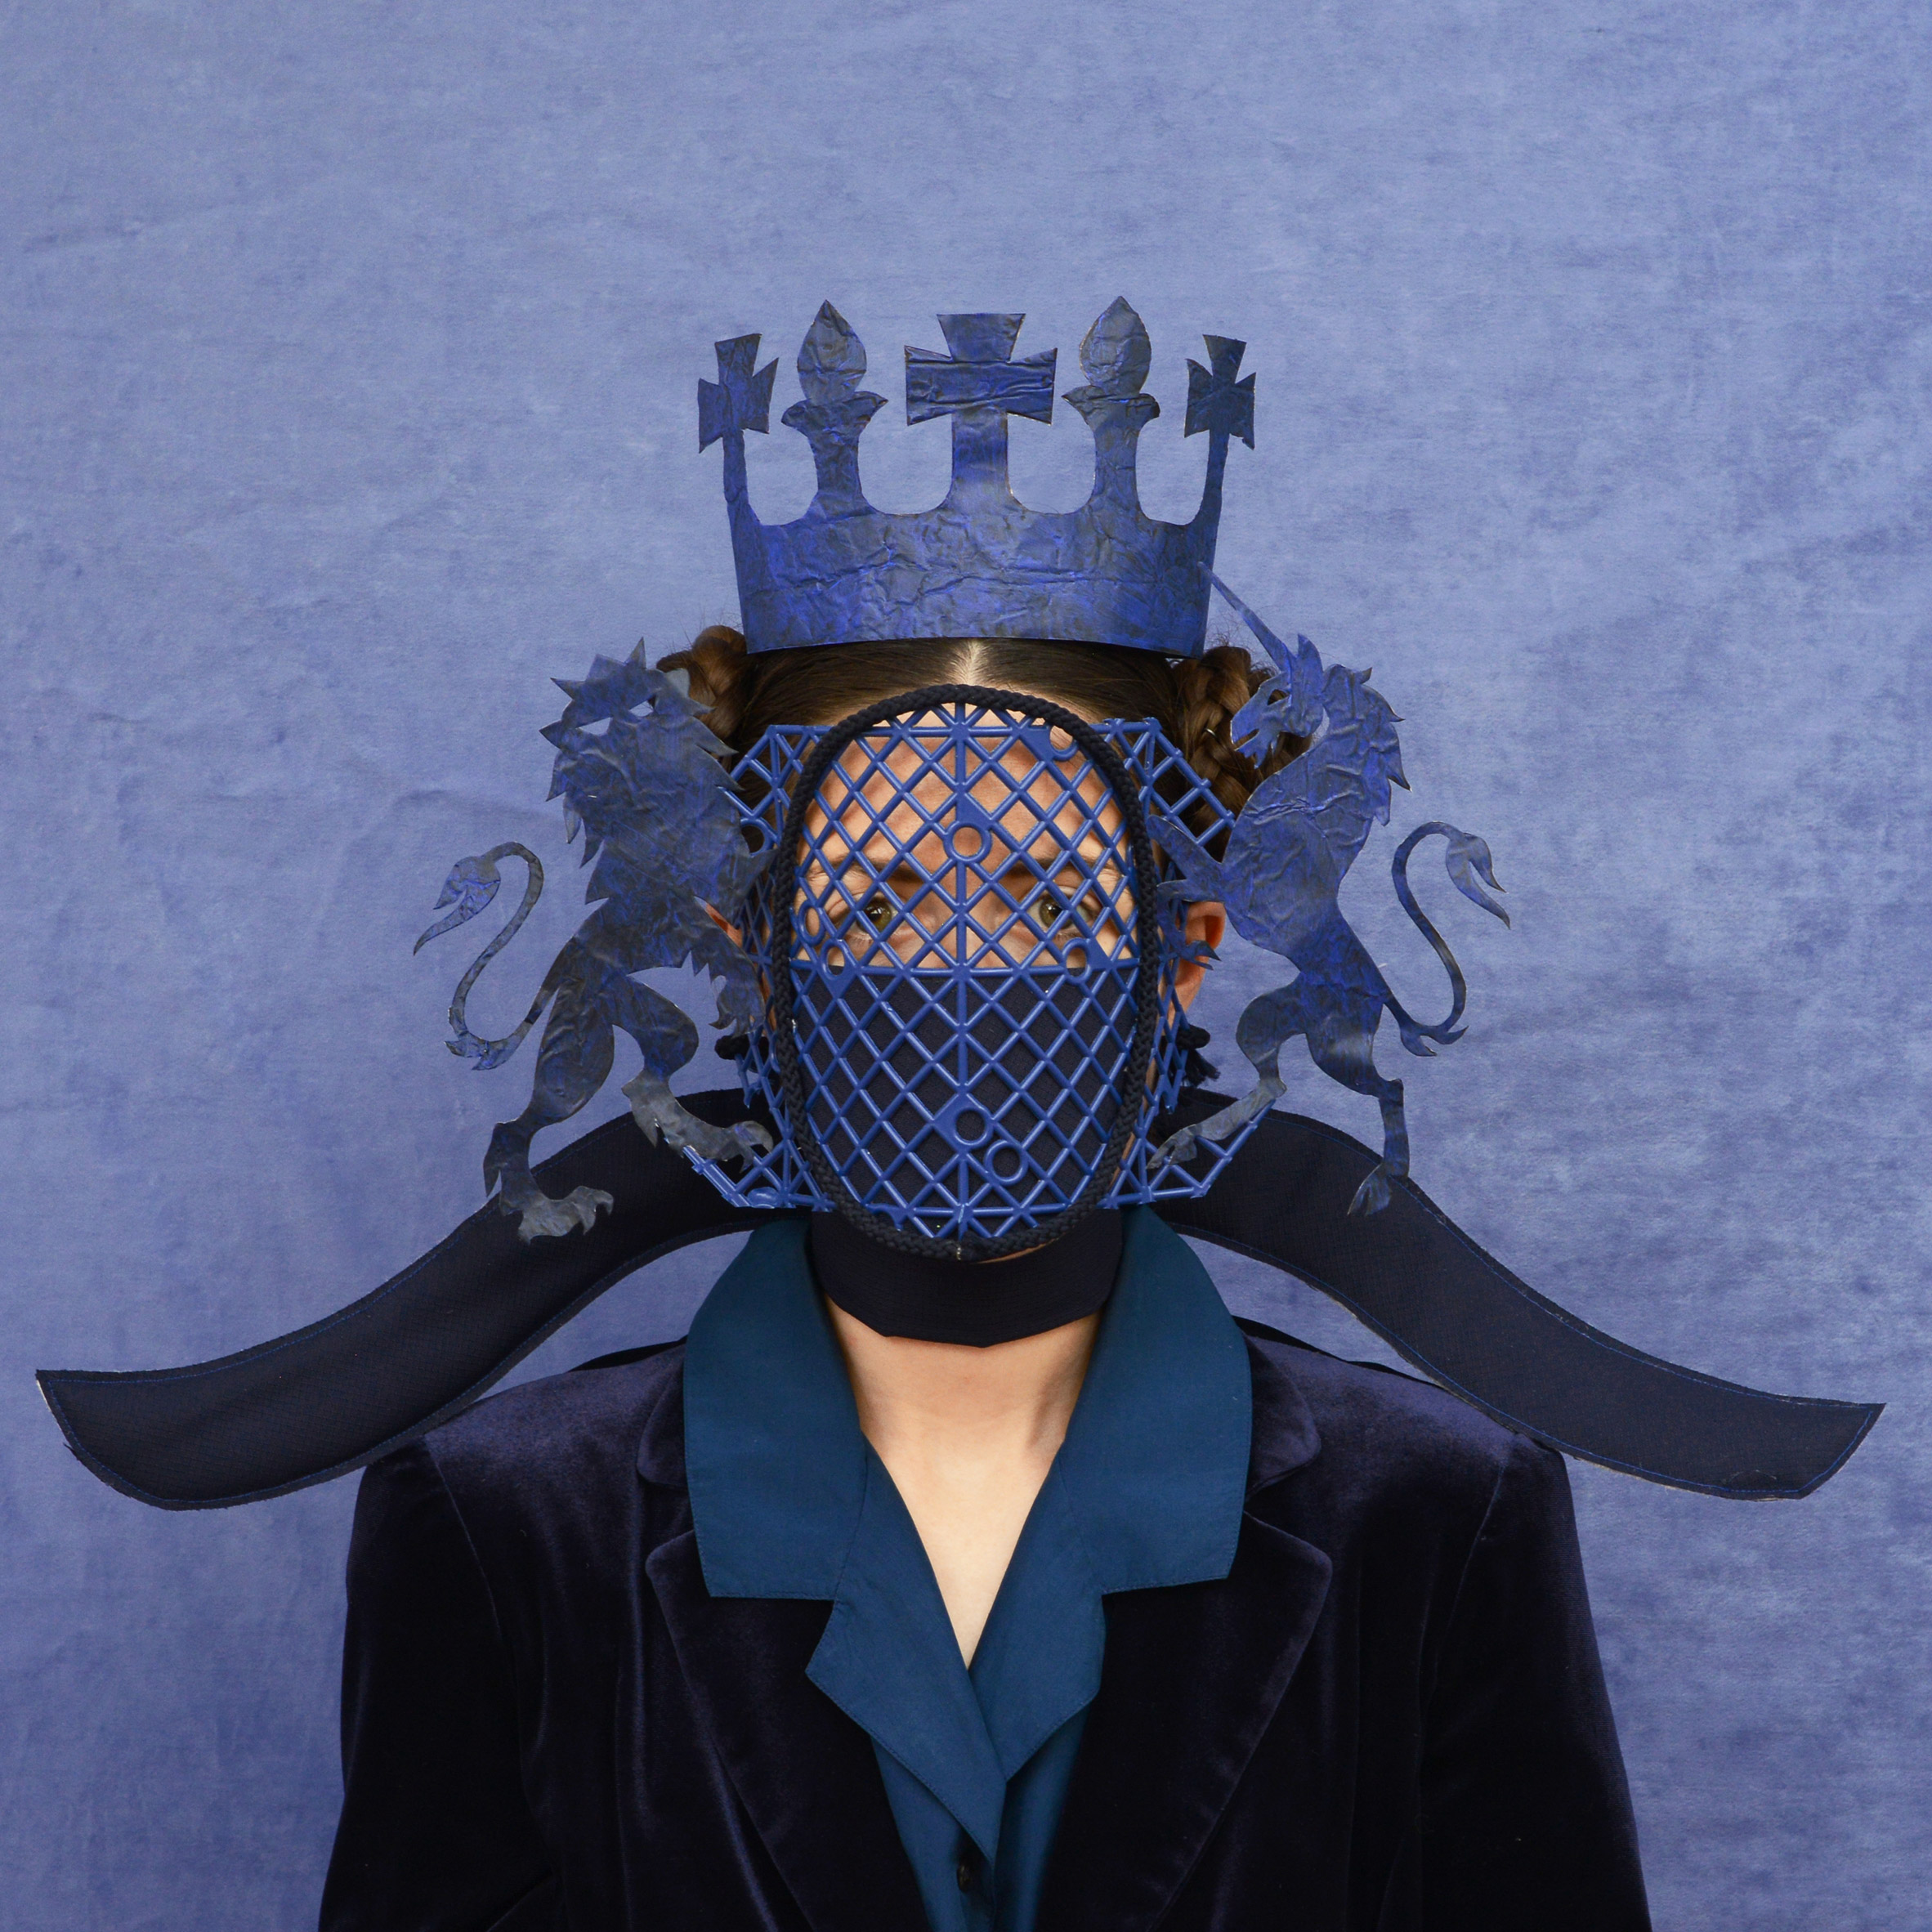 Freyja Sewell's Key Workers masks take cues from motifs in sci-fi and Buddhism